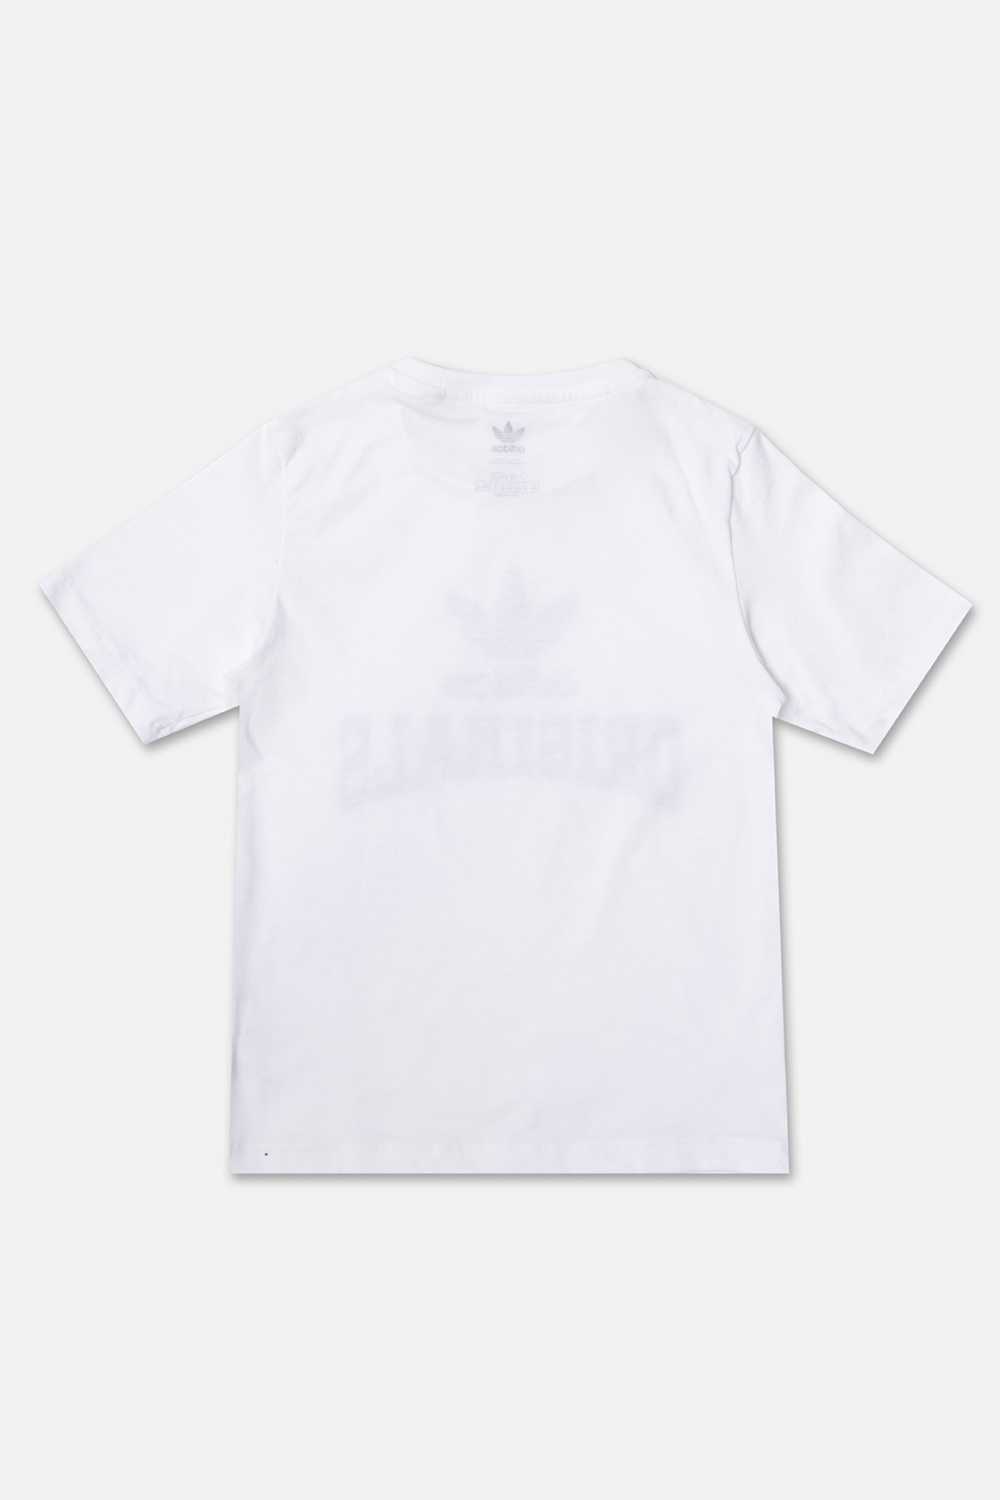 ADIDAS Kids adidas confidential tee size guide women